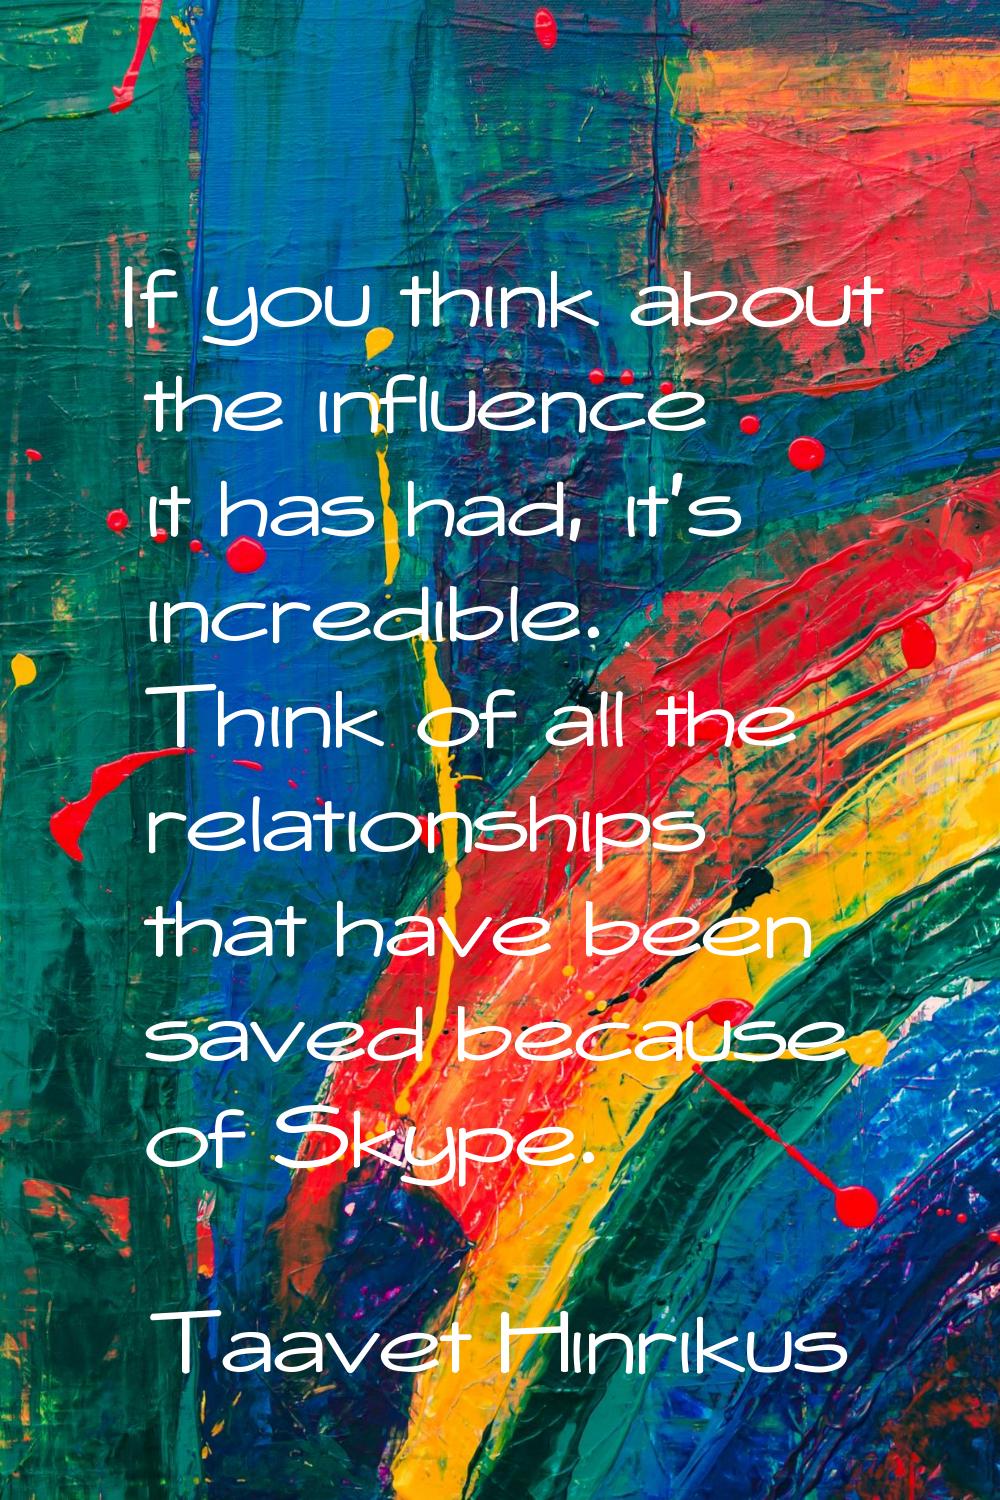 If you think about the influence it has had, it's incredible. Think of all the relationships that h